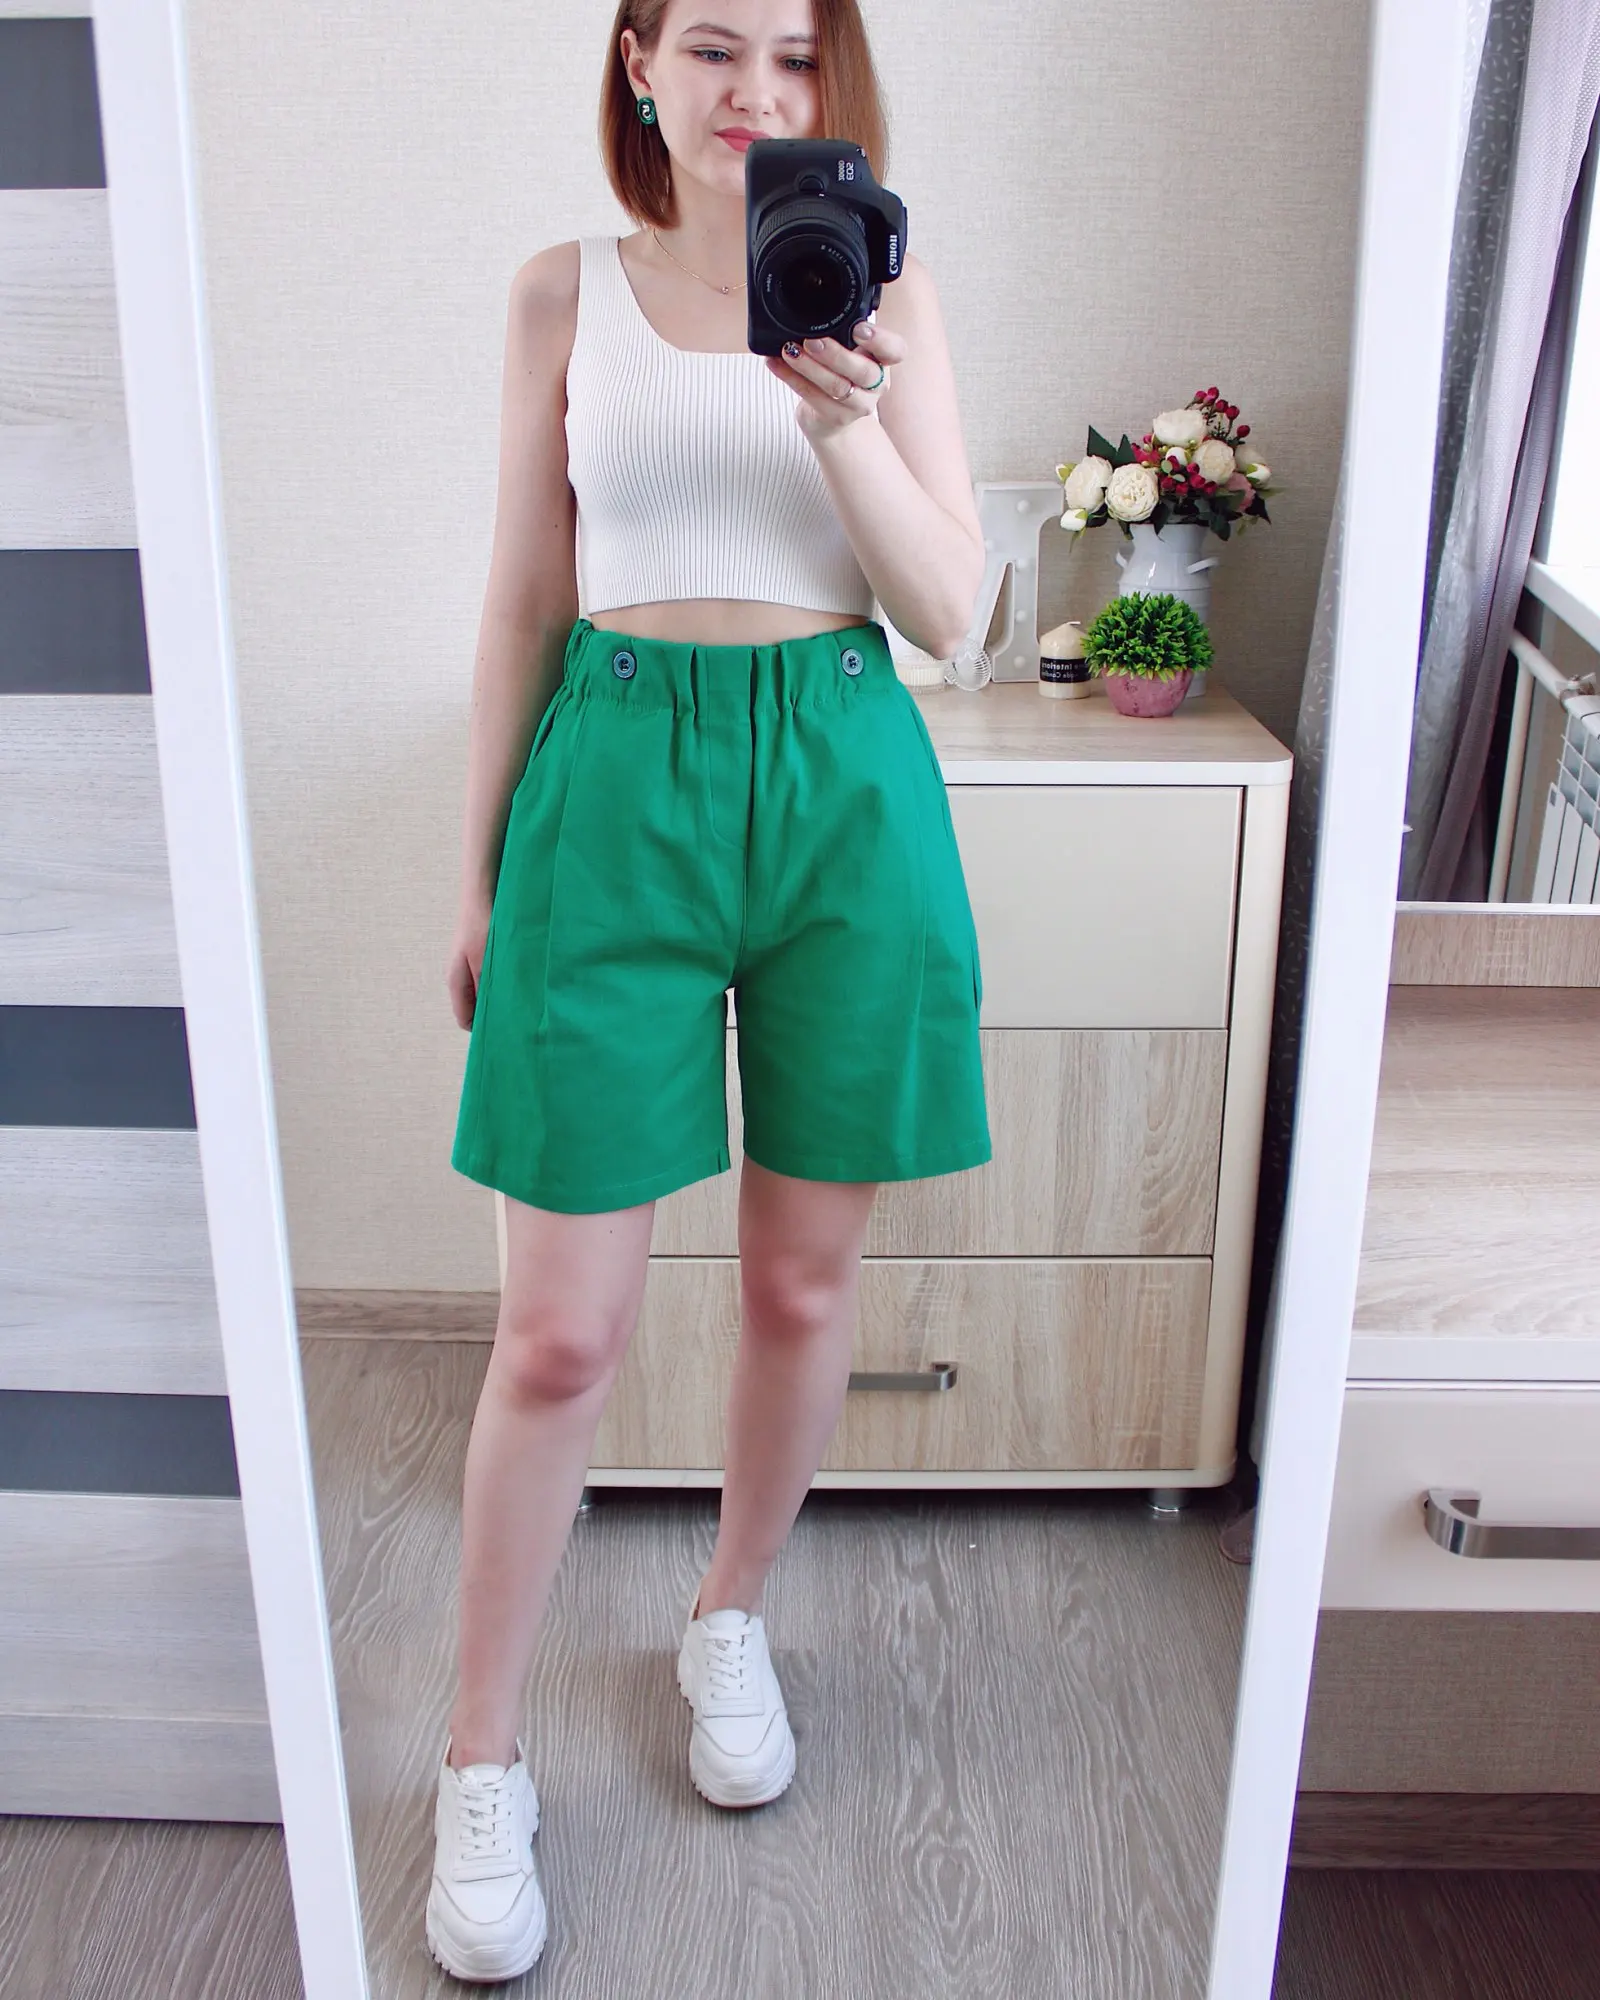 Women's Summer Shorts The New Elastic Waist Design Five-point Pants Sports Casual High Waisted Shorts 100% Cotton Female Student photo review